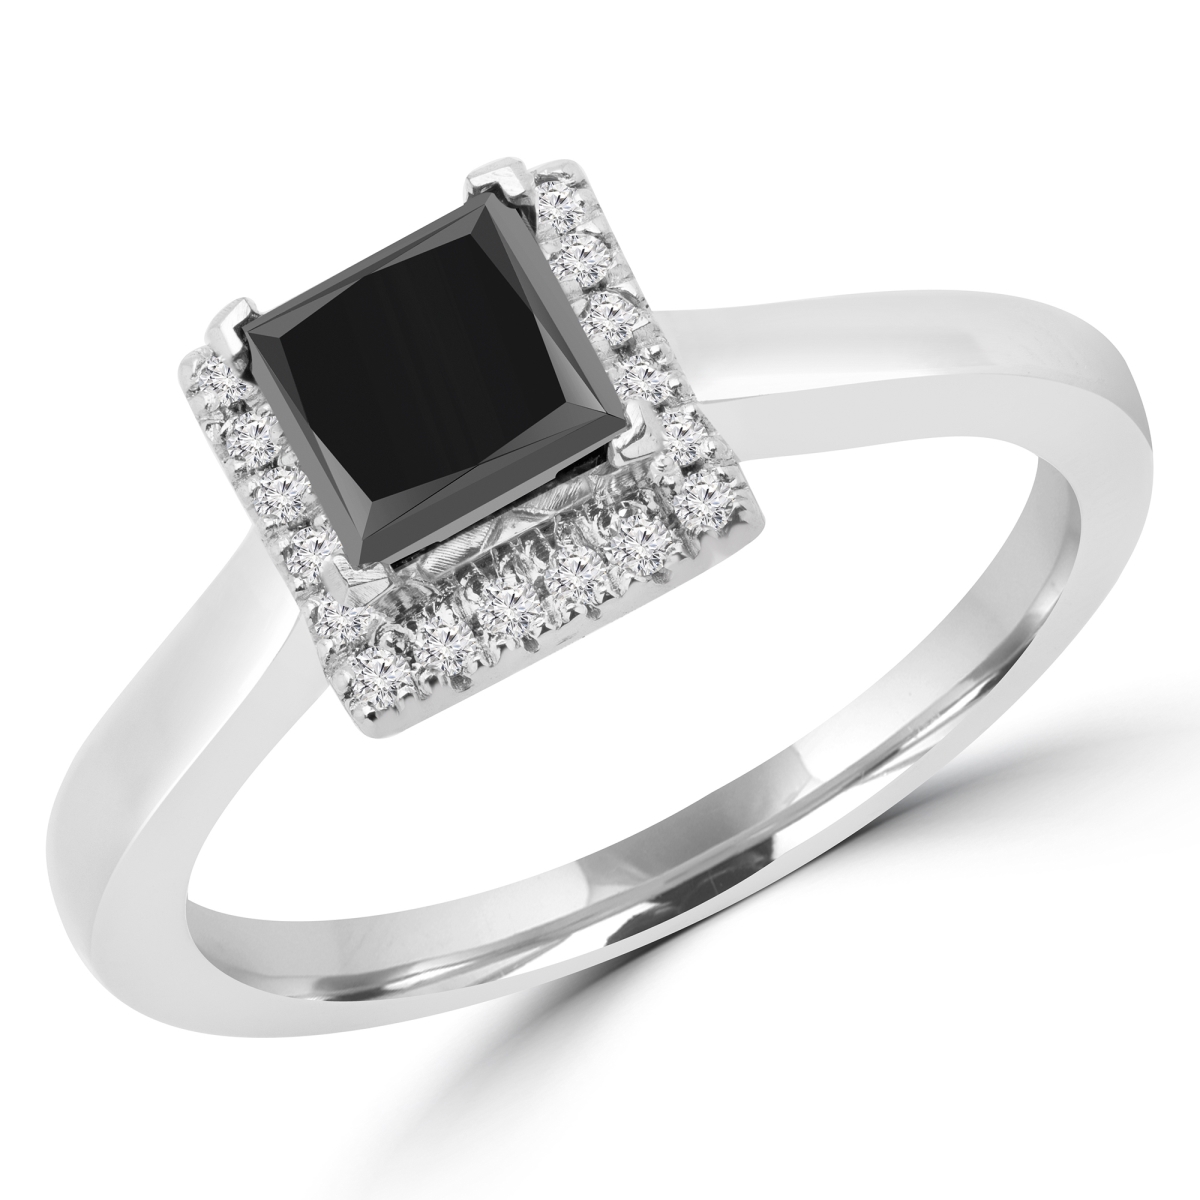 Picture of Majesty Diamonds MD170176-7.75 0.9 CTW Princess Black Diamond Halo Engagement Ring in 14K White Gold - 7.75